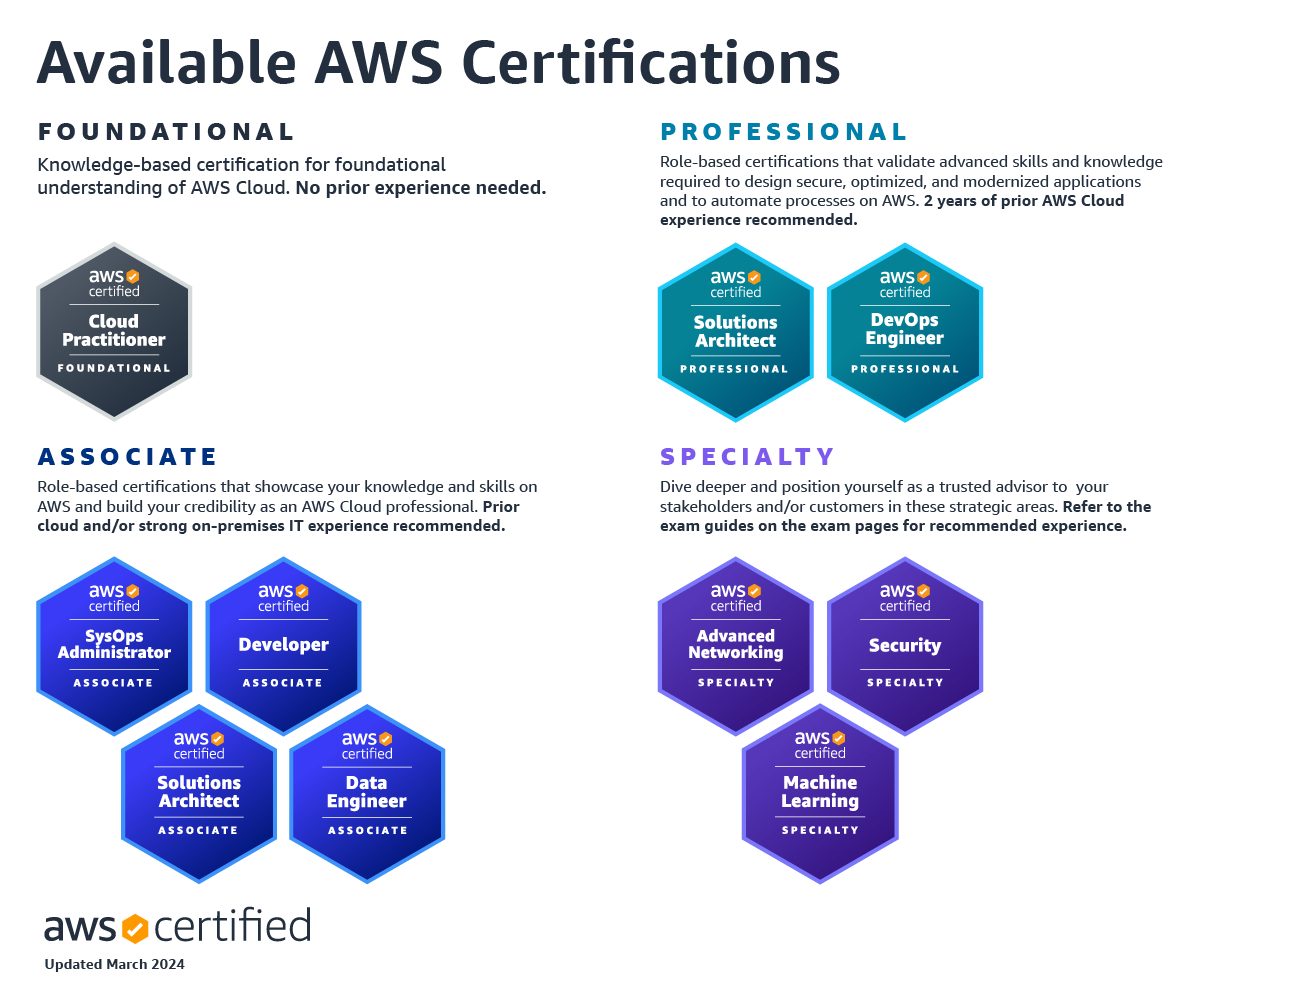 10 AWS Certification badges for Foundational, Associate, Professional and Specialty AWS Certifications